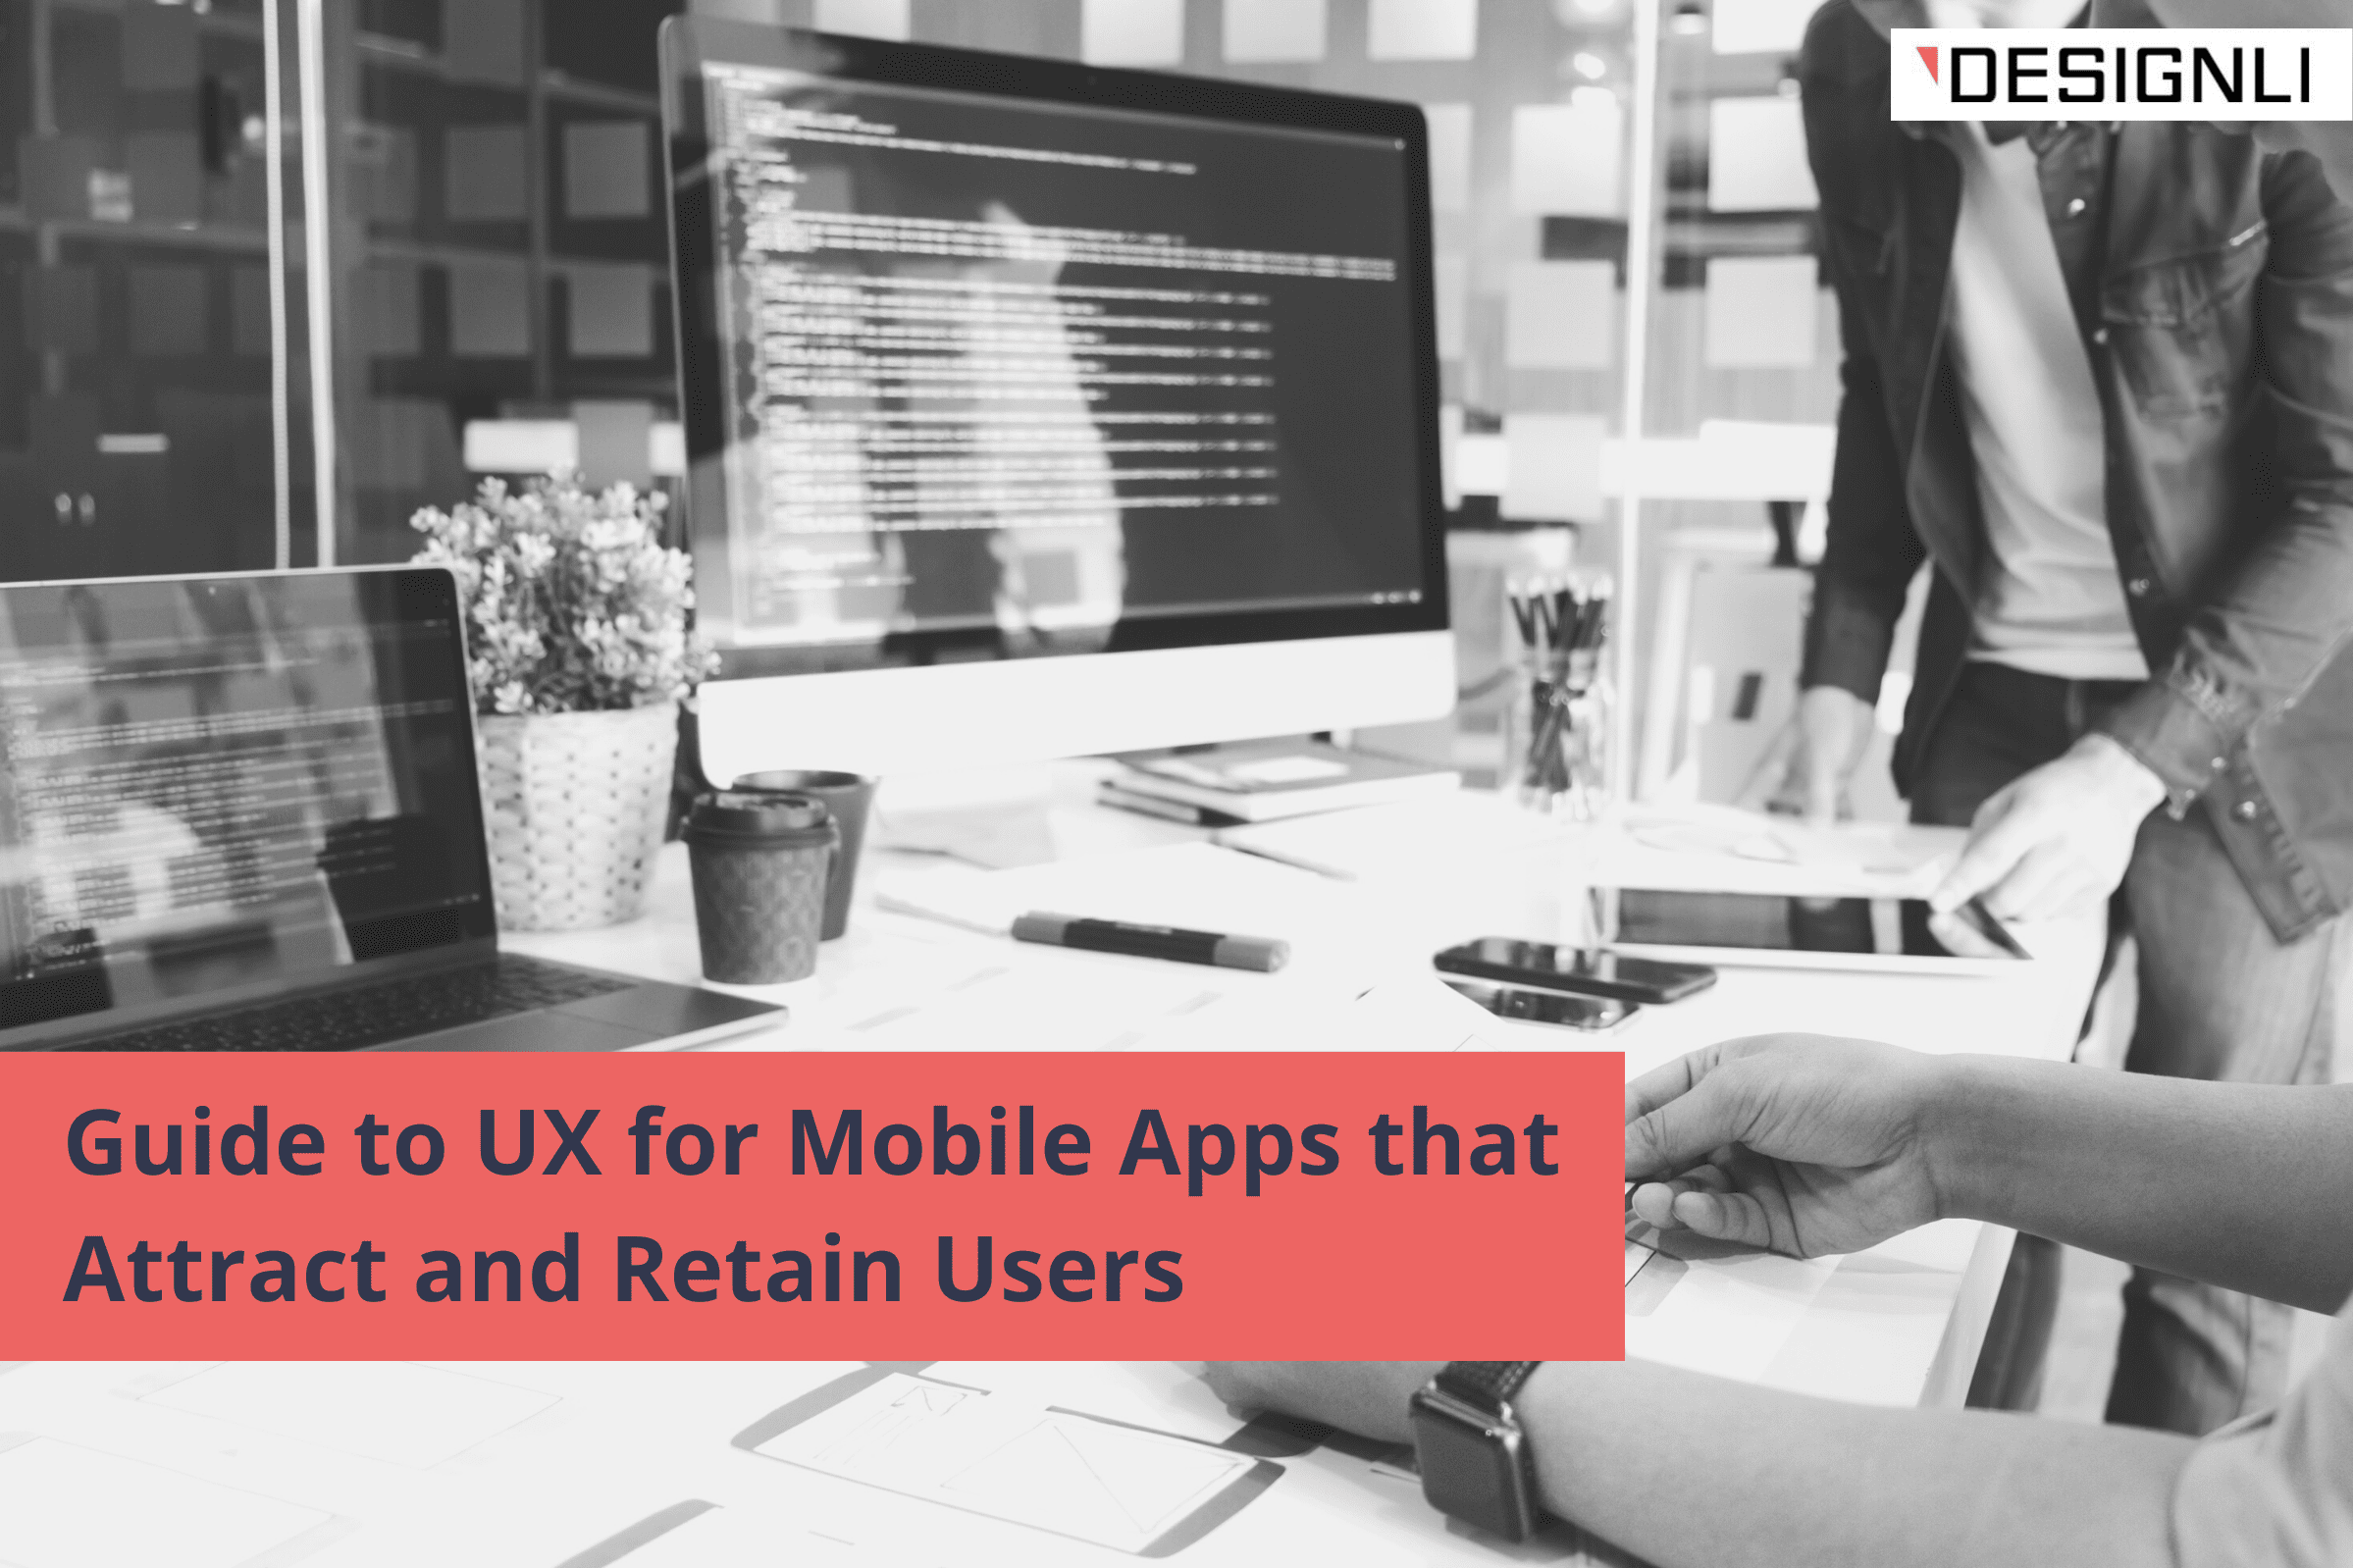 Guide to UX for Mobile Apps that Attract and Retain Users